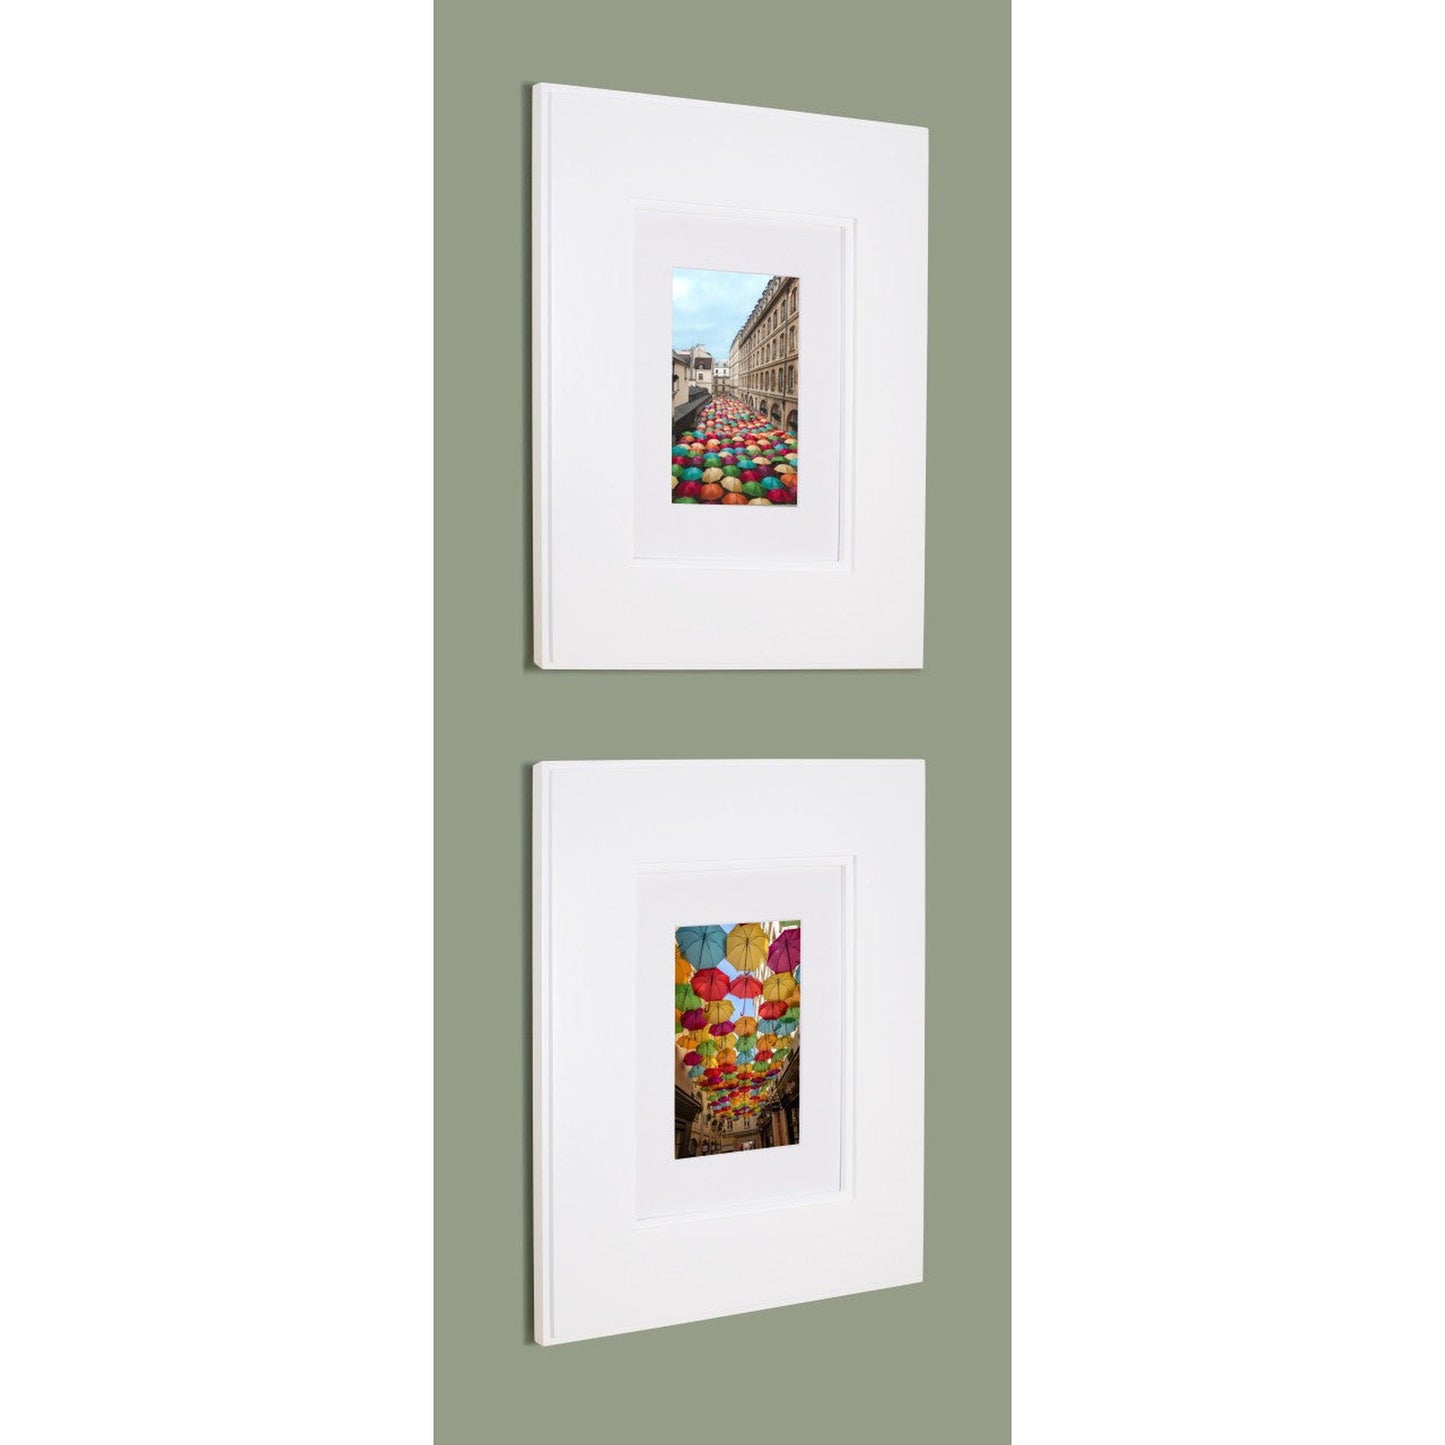 Fox Hollow Furnishings 11" x 14" White Compact Portrait Shaker Standard Depth Recessed Picture Frame Medicine Cabinet With Mirror